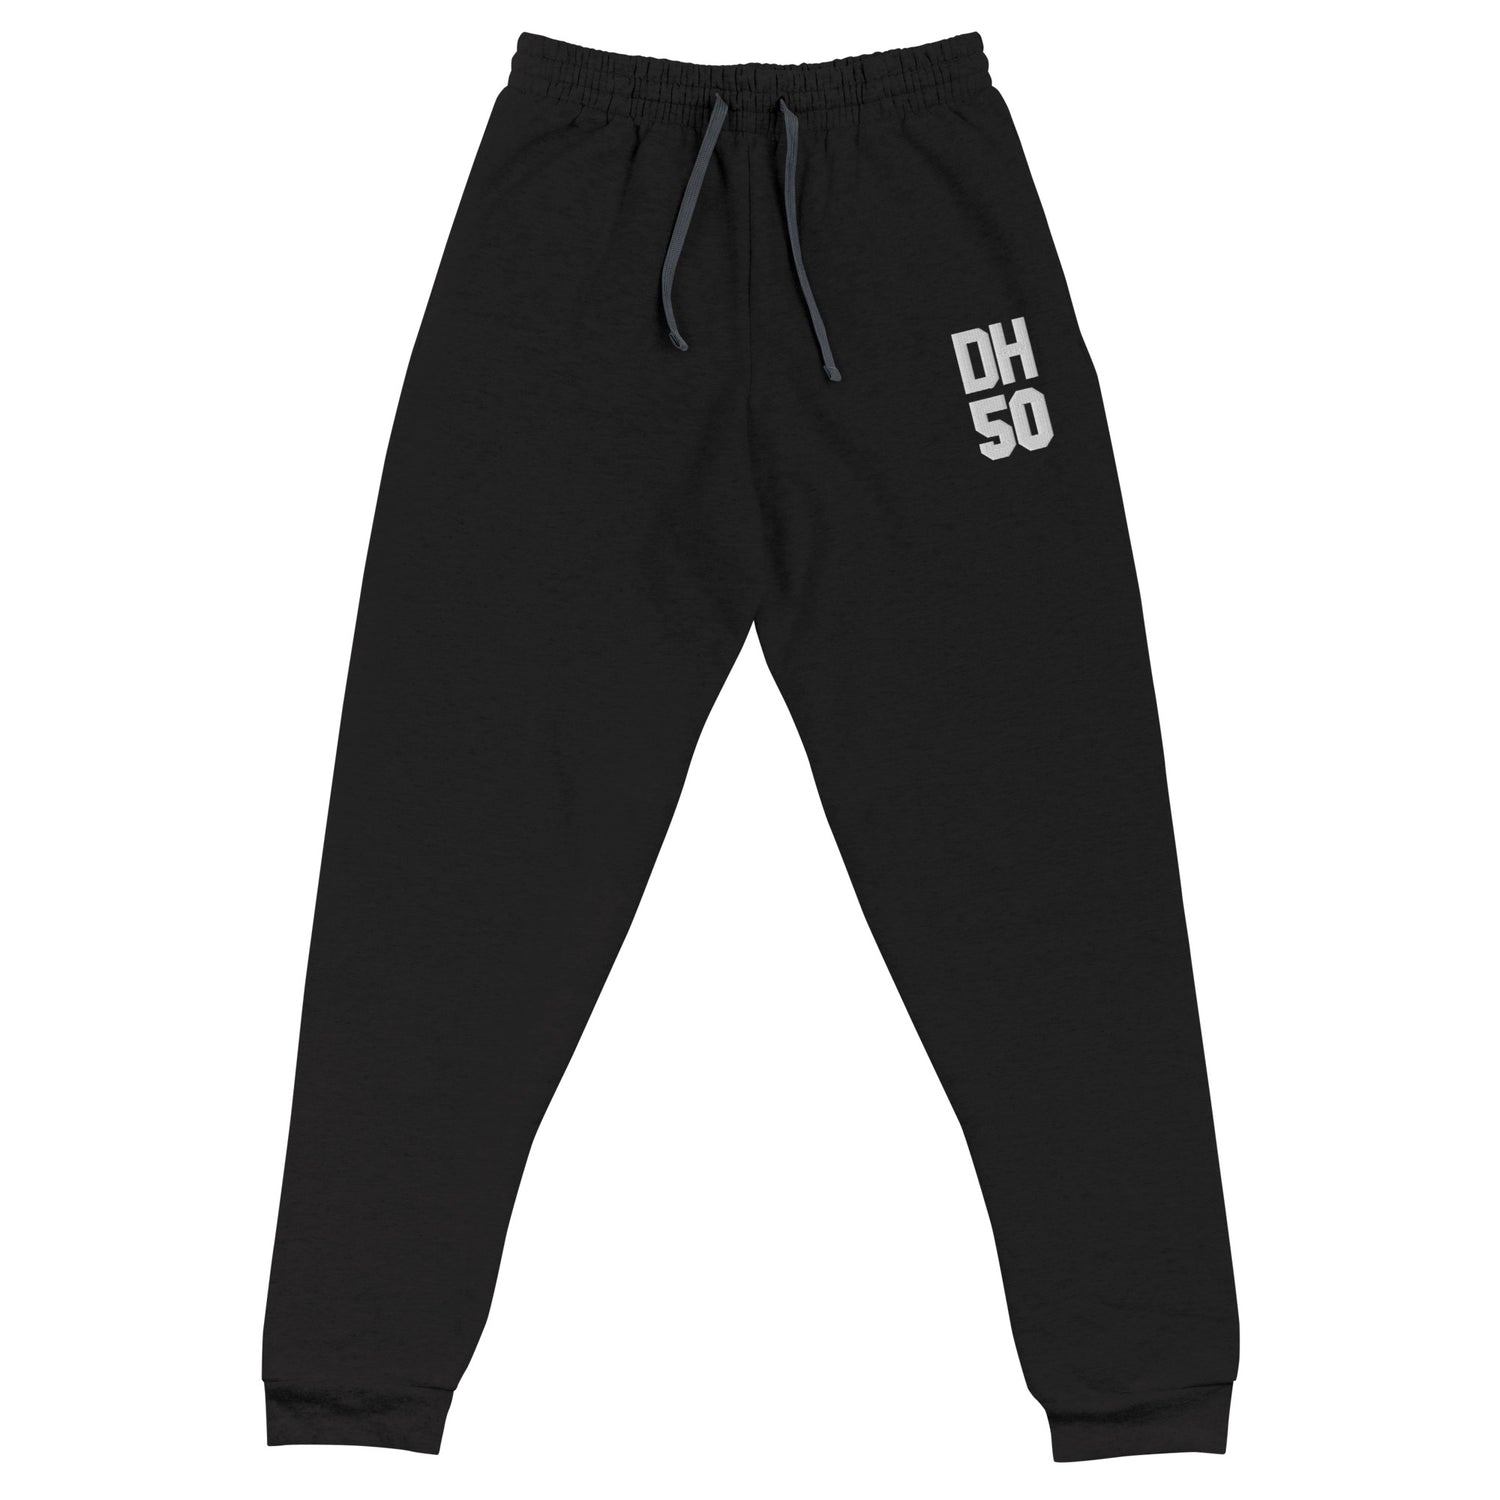 Black joggers with DH50 embroidered on them.